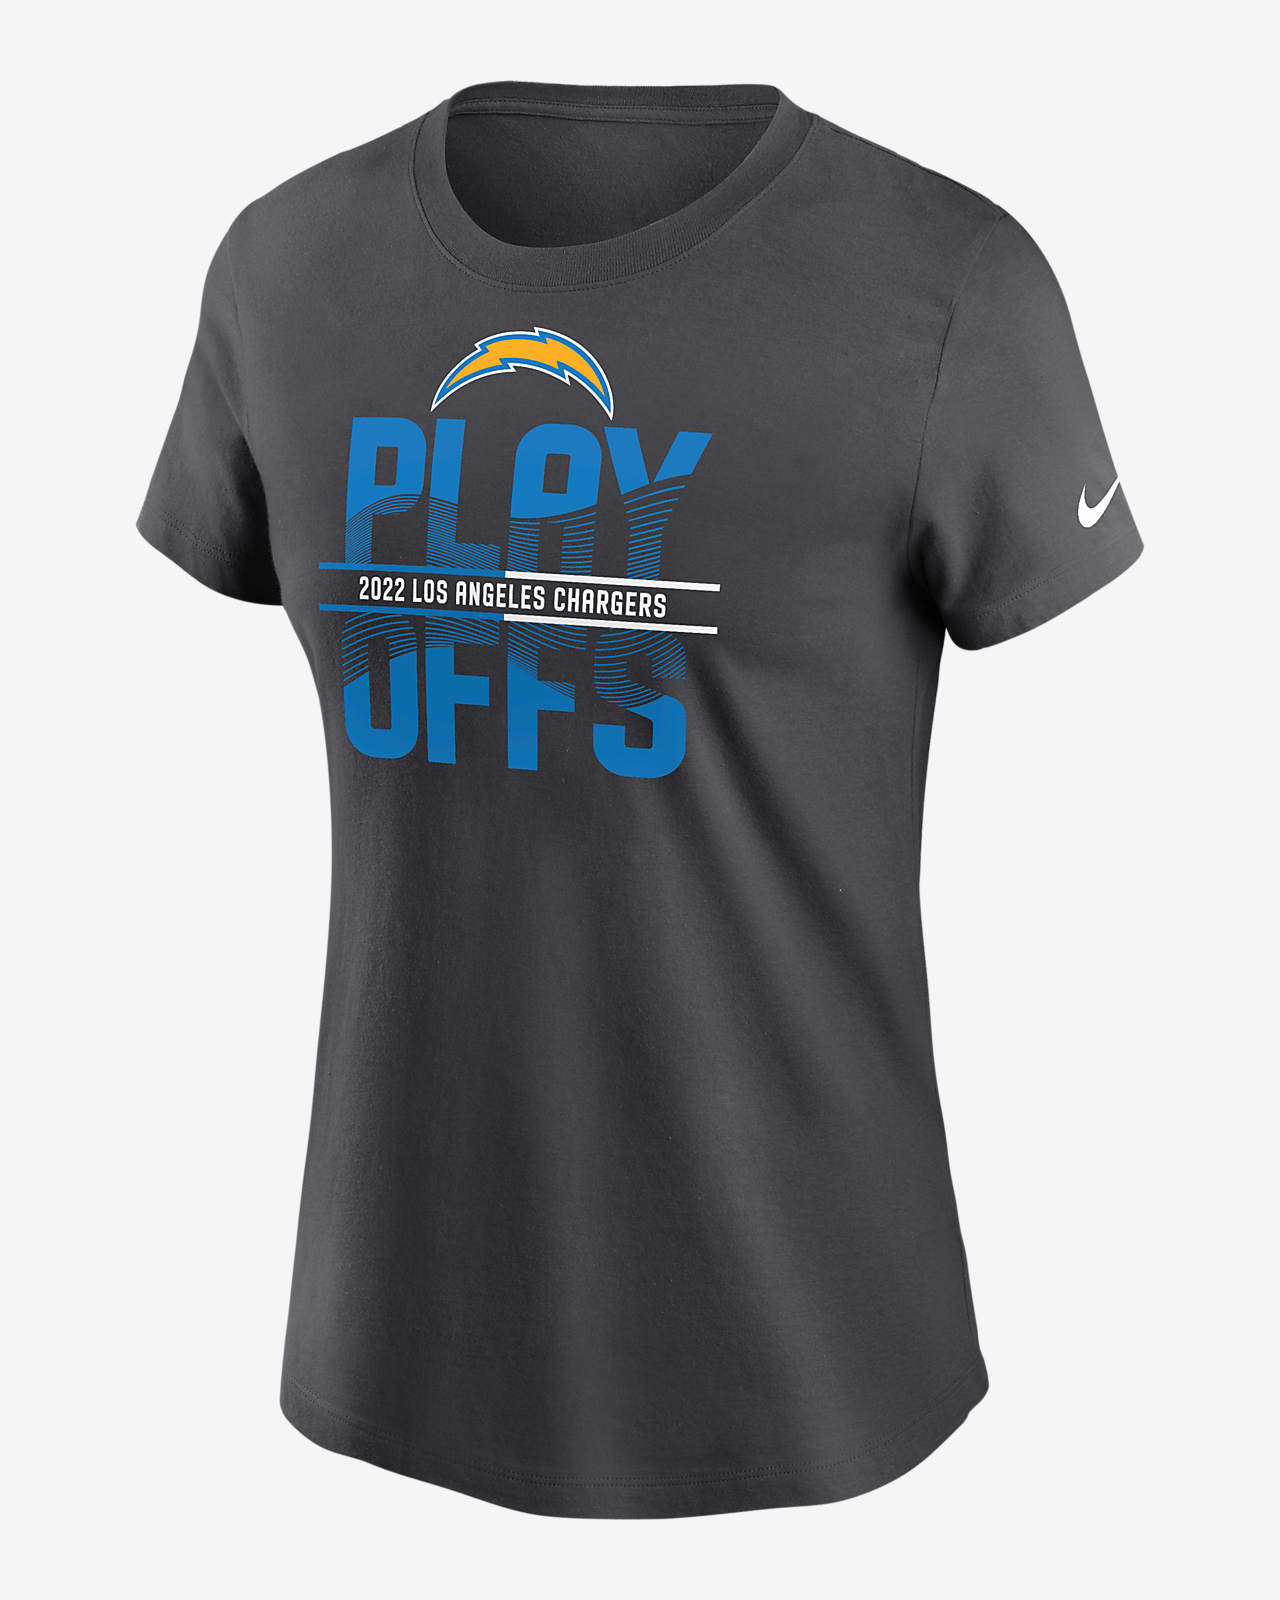 Playera para mujer Nike 2022 NFL Playoffs (NFL Angeles Chargers).